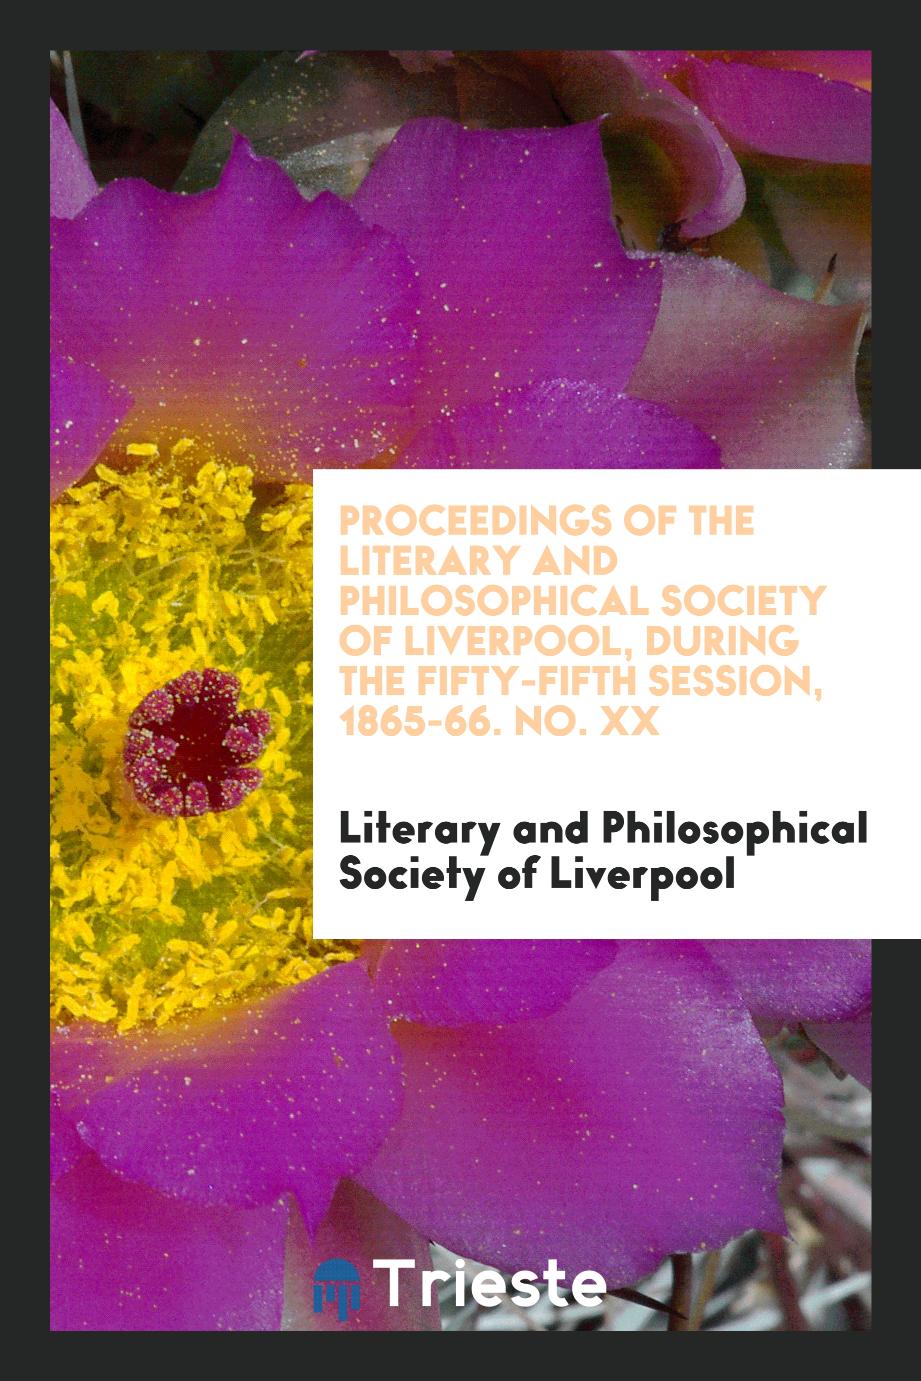 Proceedings of the Literary and Philosophical Society of Liverpool, during the Fifty-Fifth Session, 1865-66. No. XX